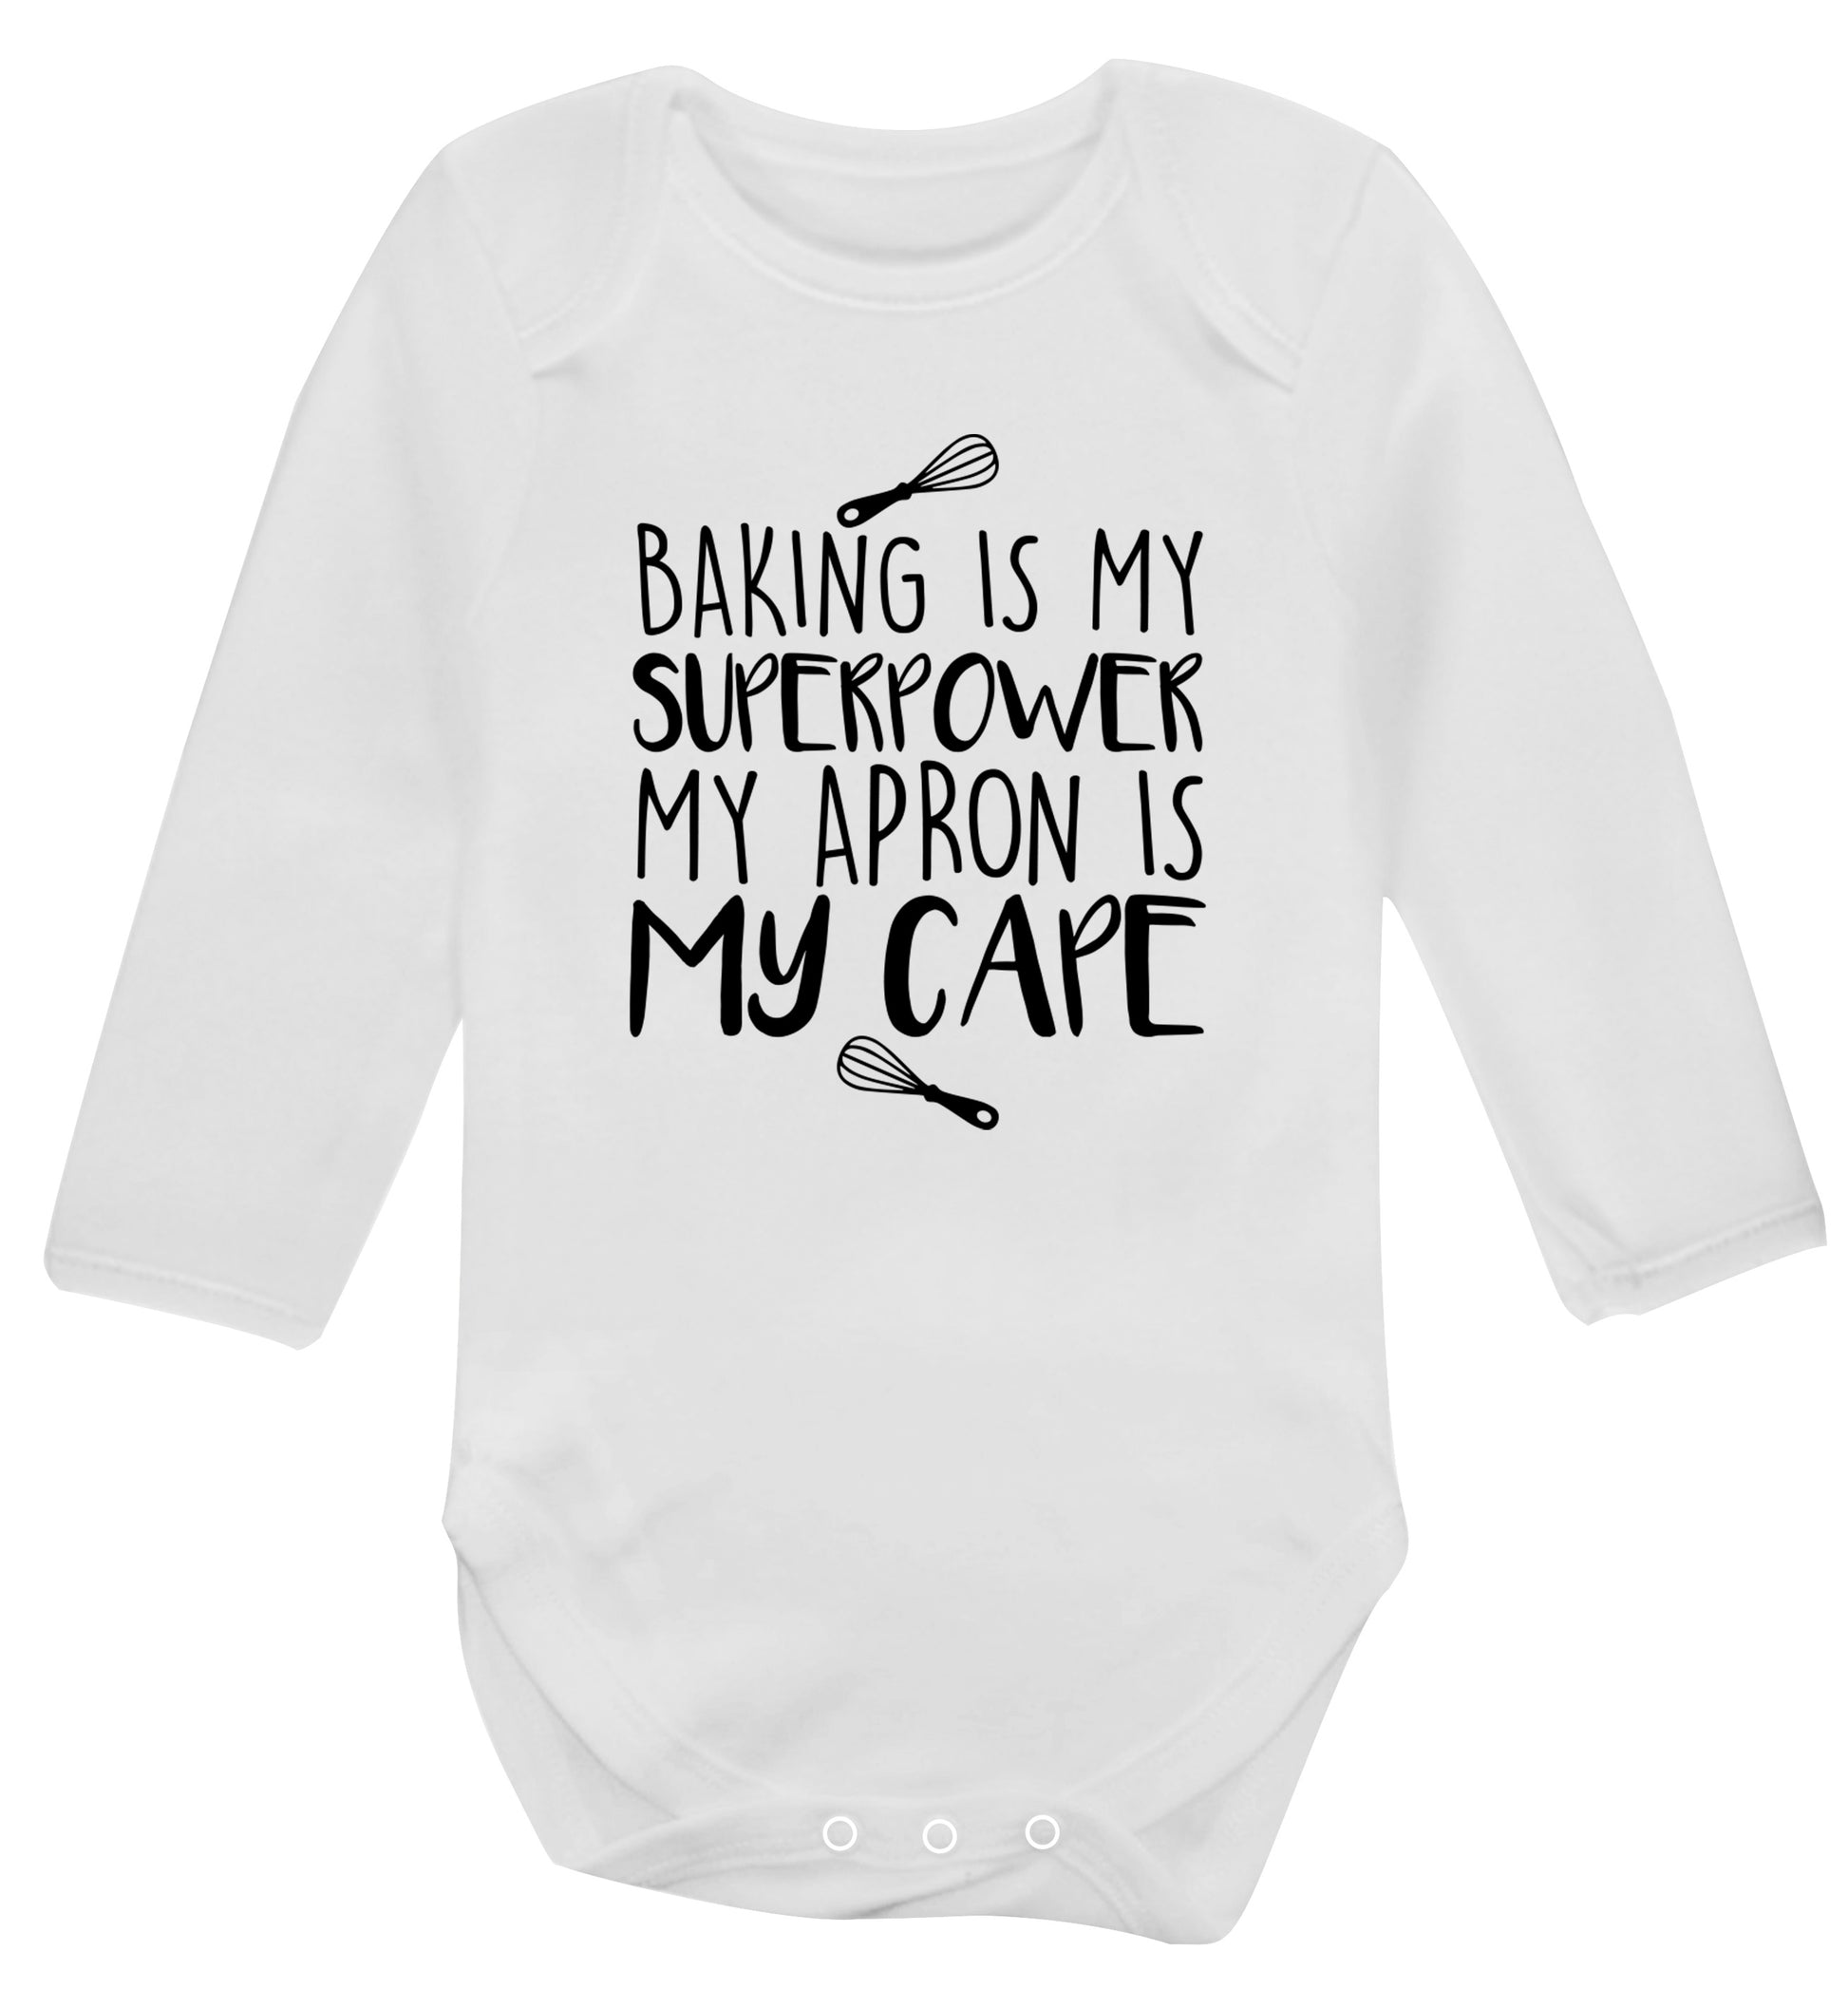 Baking is my superpower my apron is my cape Baby Vest long sleeved white 6-12 months